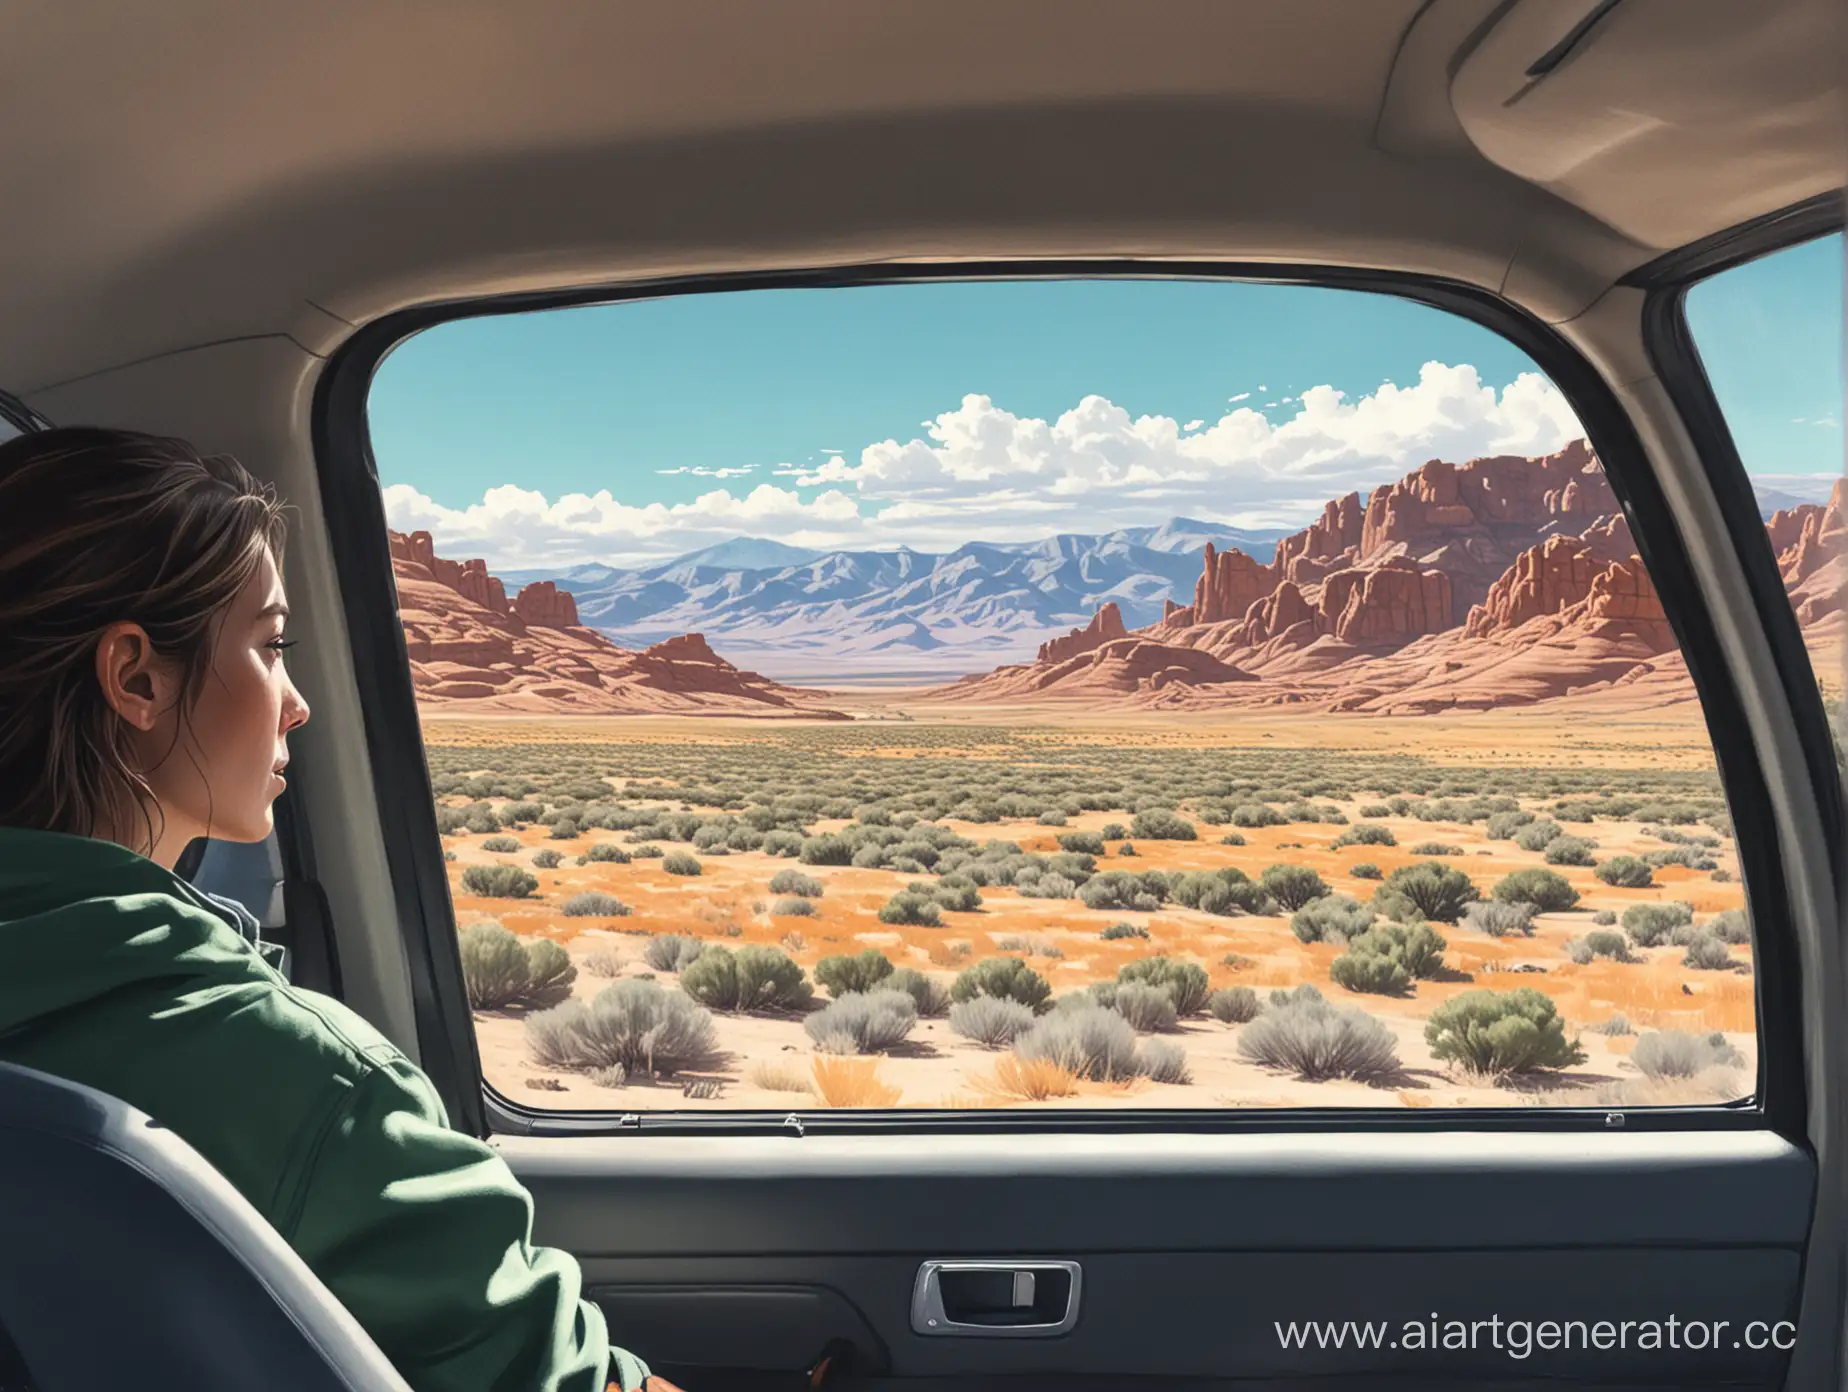 Illustration of a person in a car in the passenger seat. The Nevada landscape is outside the window